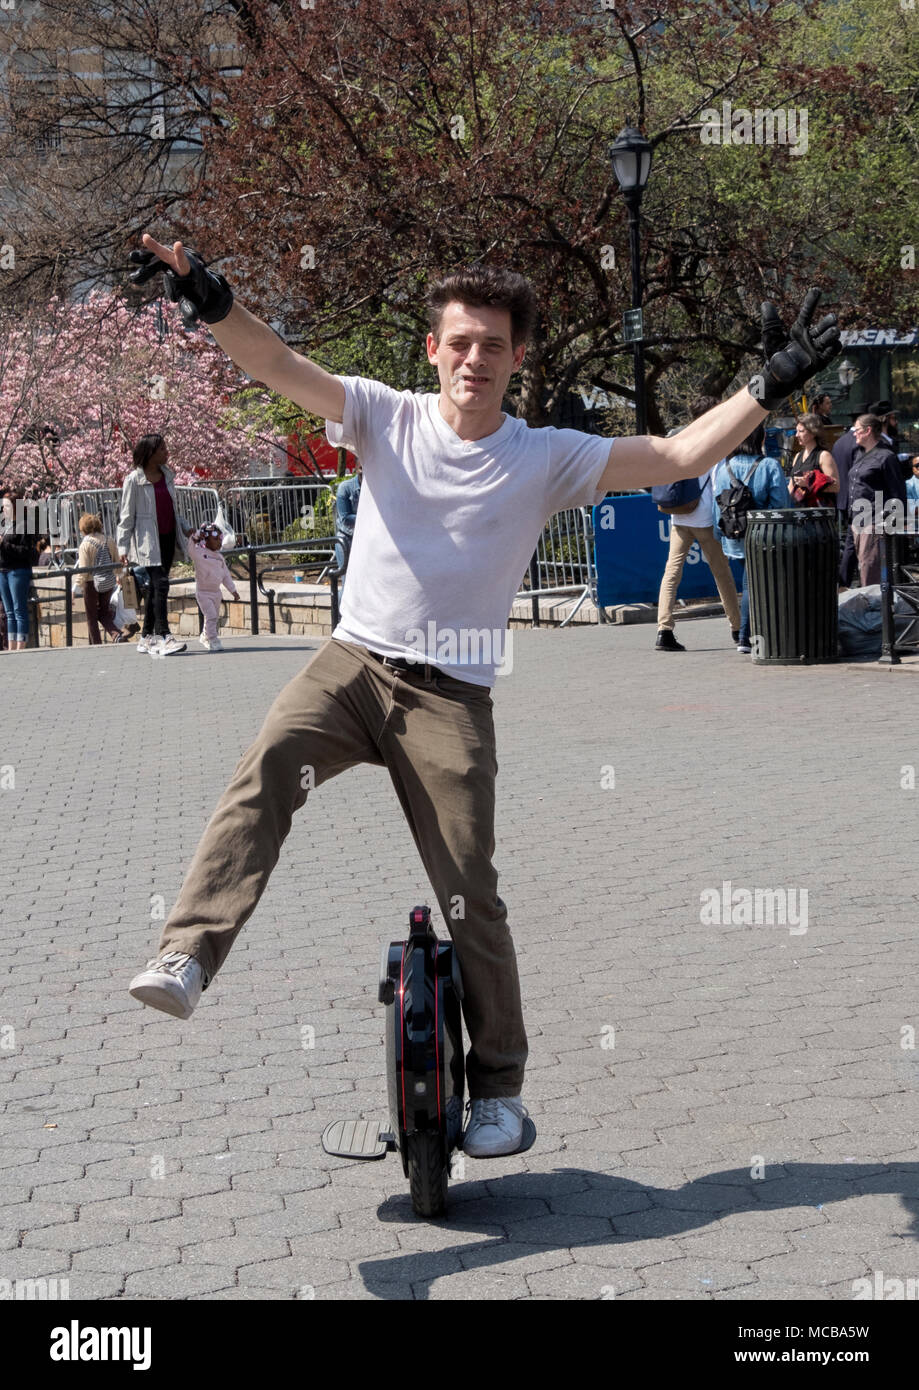 An Englishman living in New York riding an electric unicycle in Union Square Park in Manhattan, New York City. Stock Photo